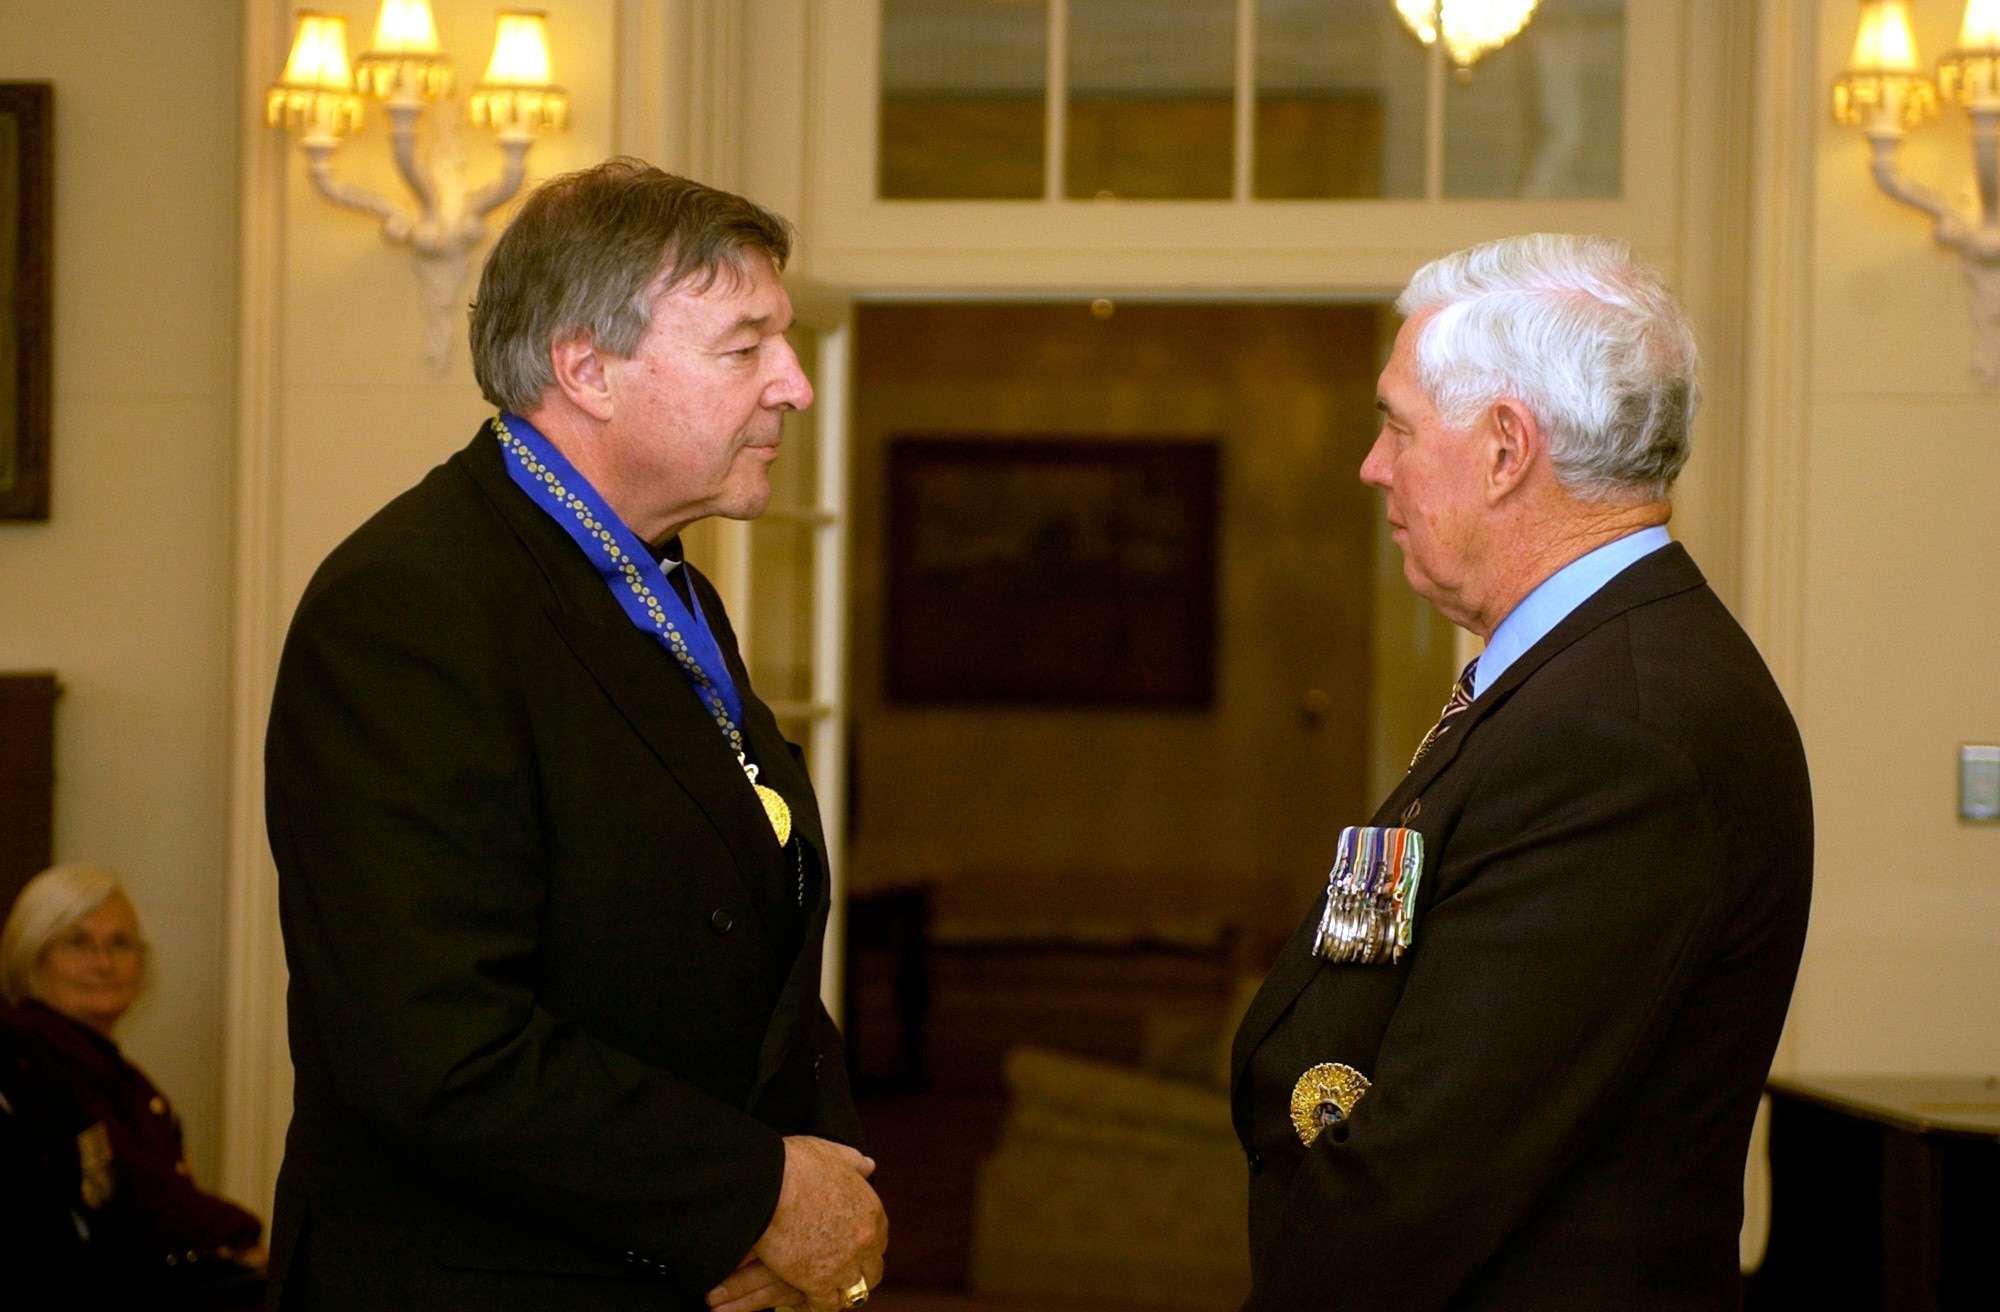 Cardinal George Pell receives the Order of Australia from Governor General Michael Jeffery in Canberra, September 2, 2005 (AAP)